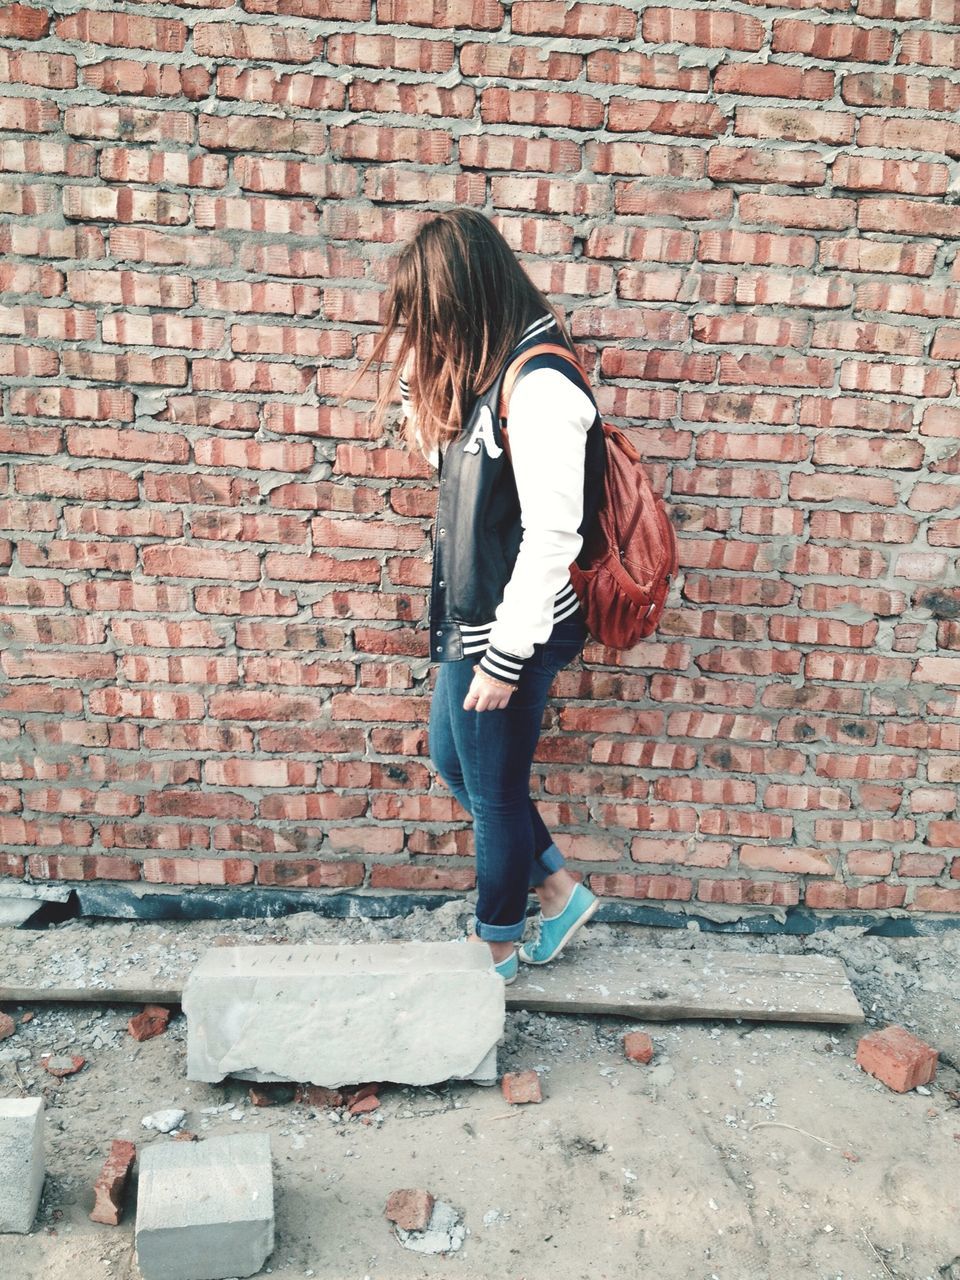 full length, brick wall, lifestyles, casual clothing, young adult, leisure activity, standing, young women, wall - building feature, built structure, architecture, building exterior, person, long hair, stone wall, front view, side view, red